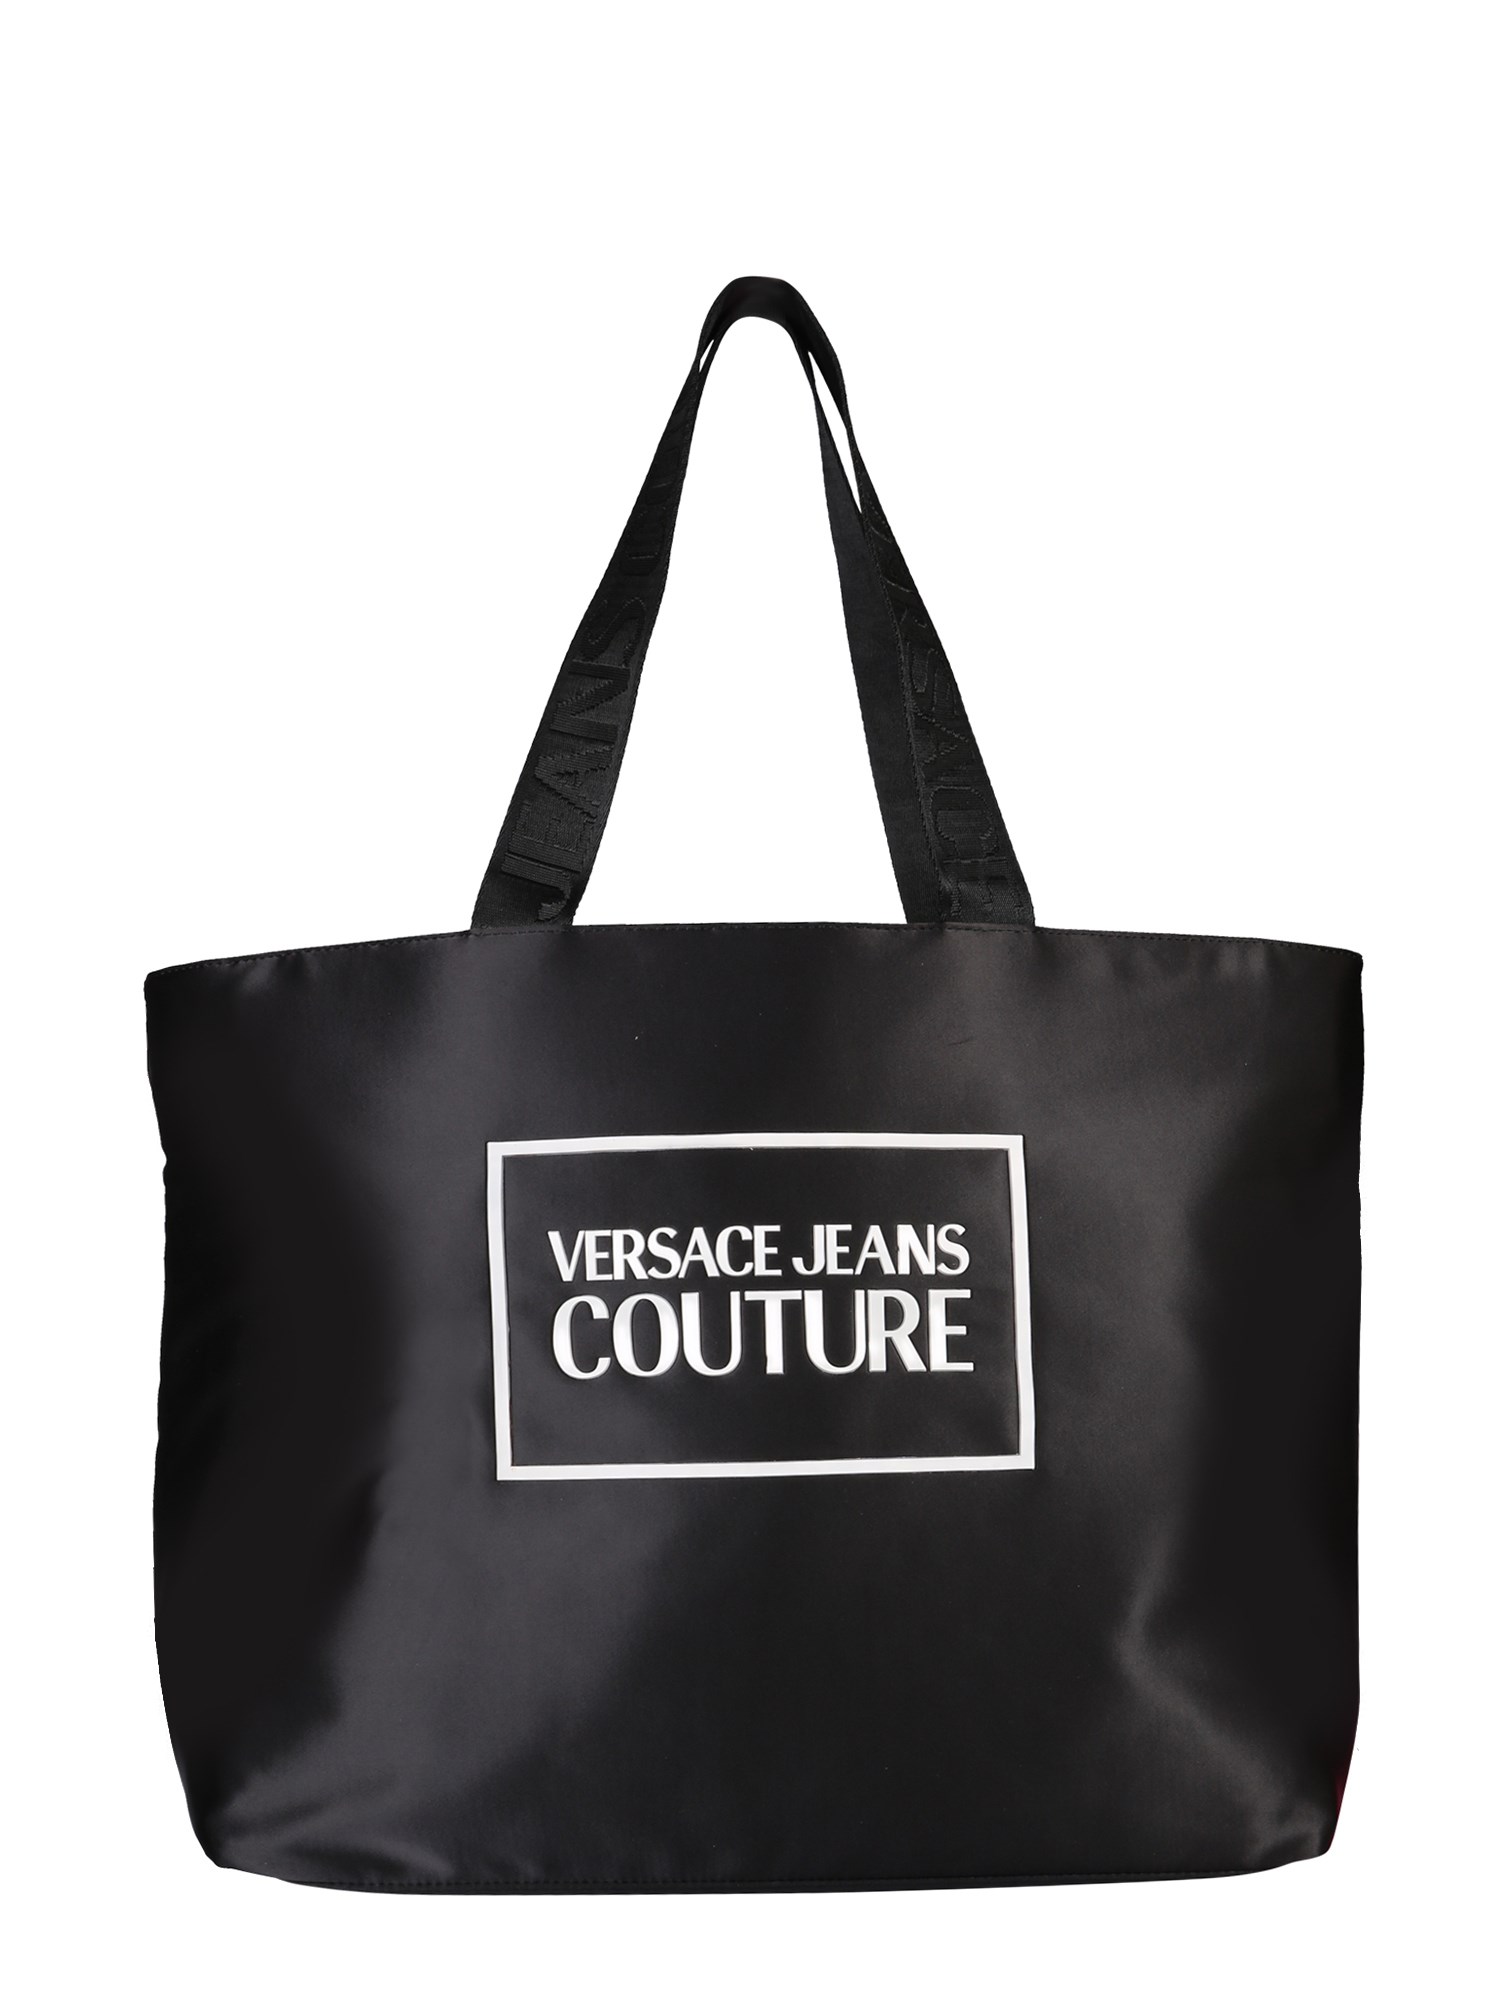 VERSACE JEANS COUTURE Bags | ModeSens